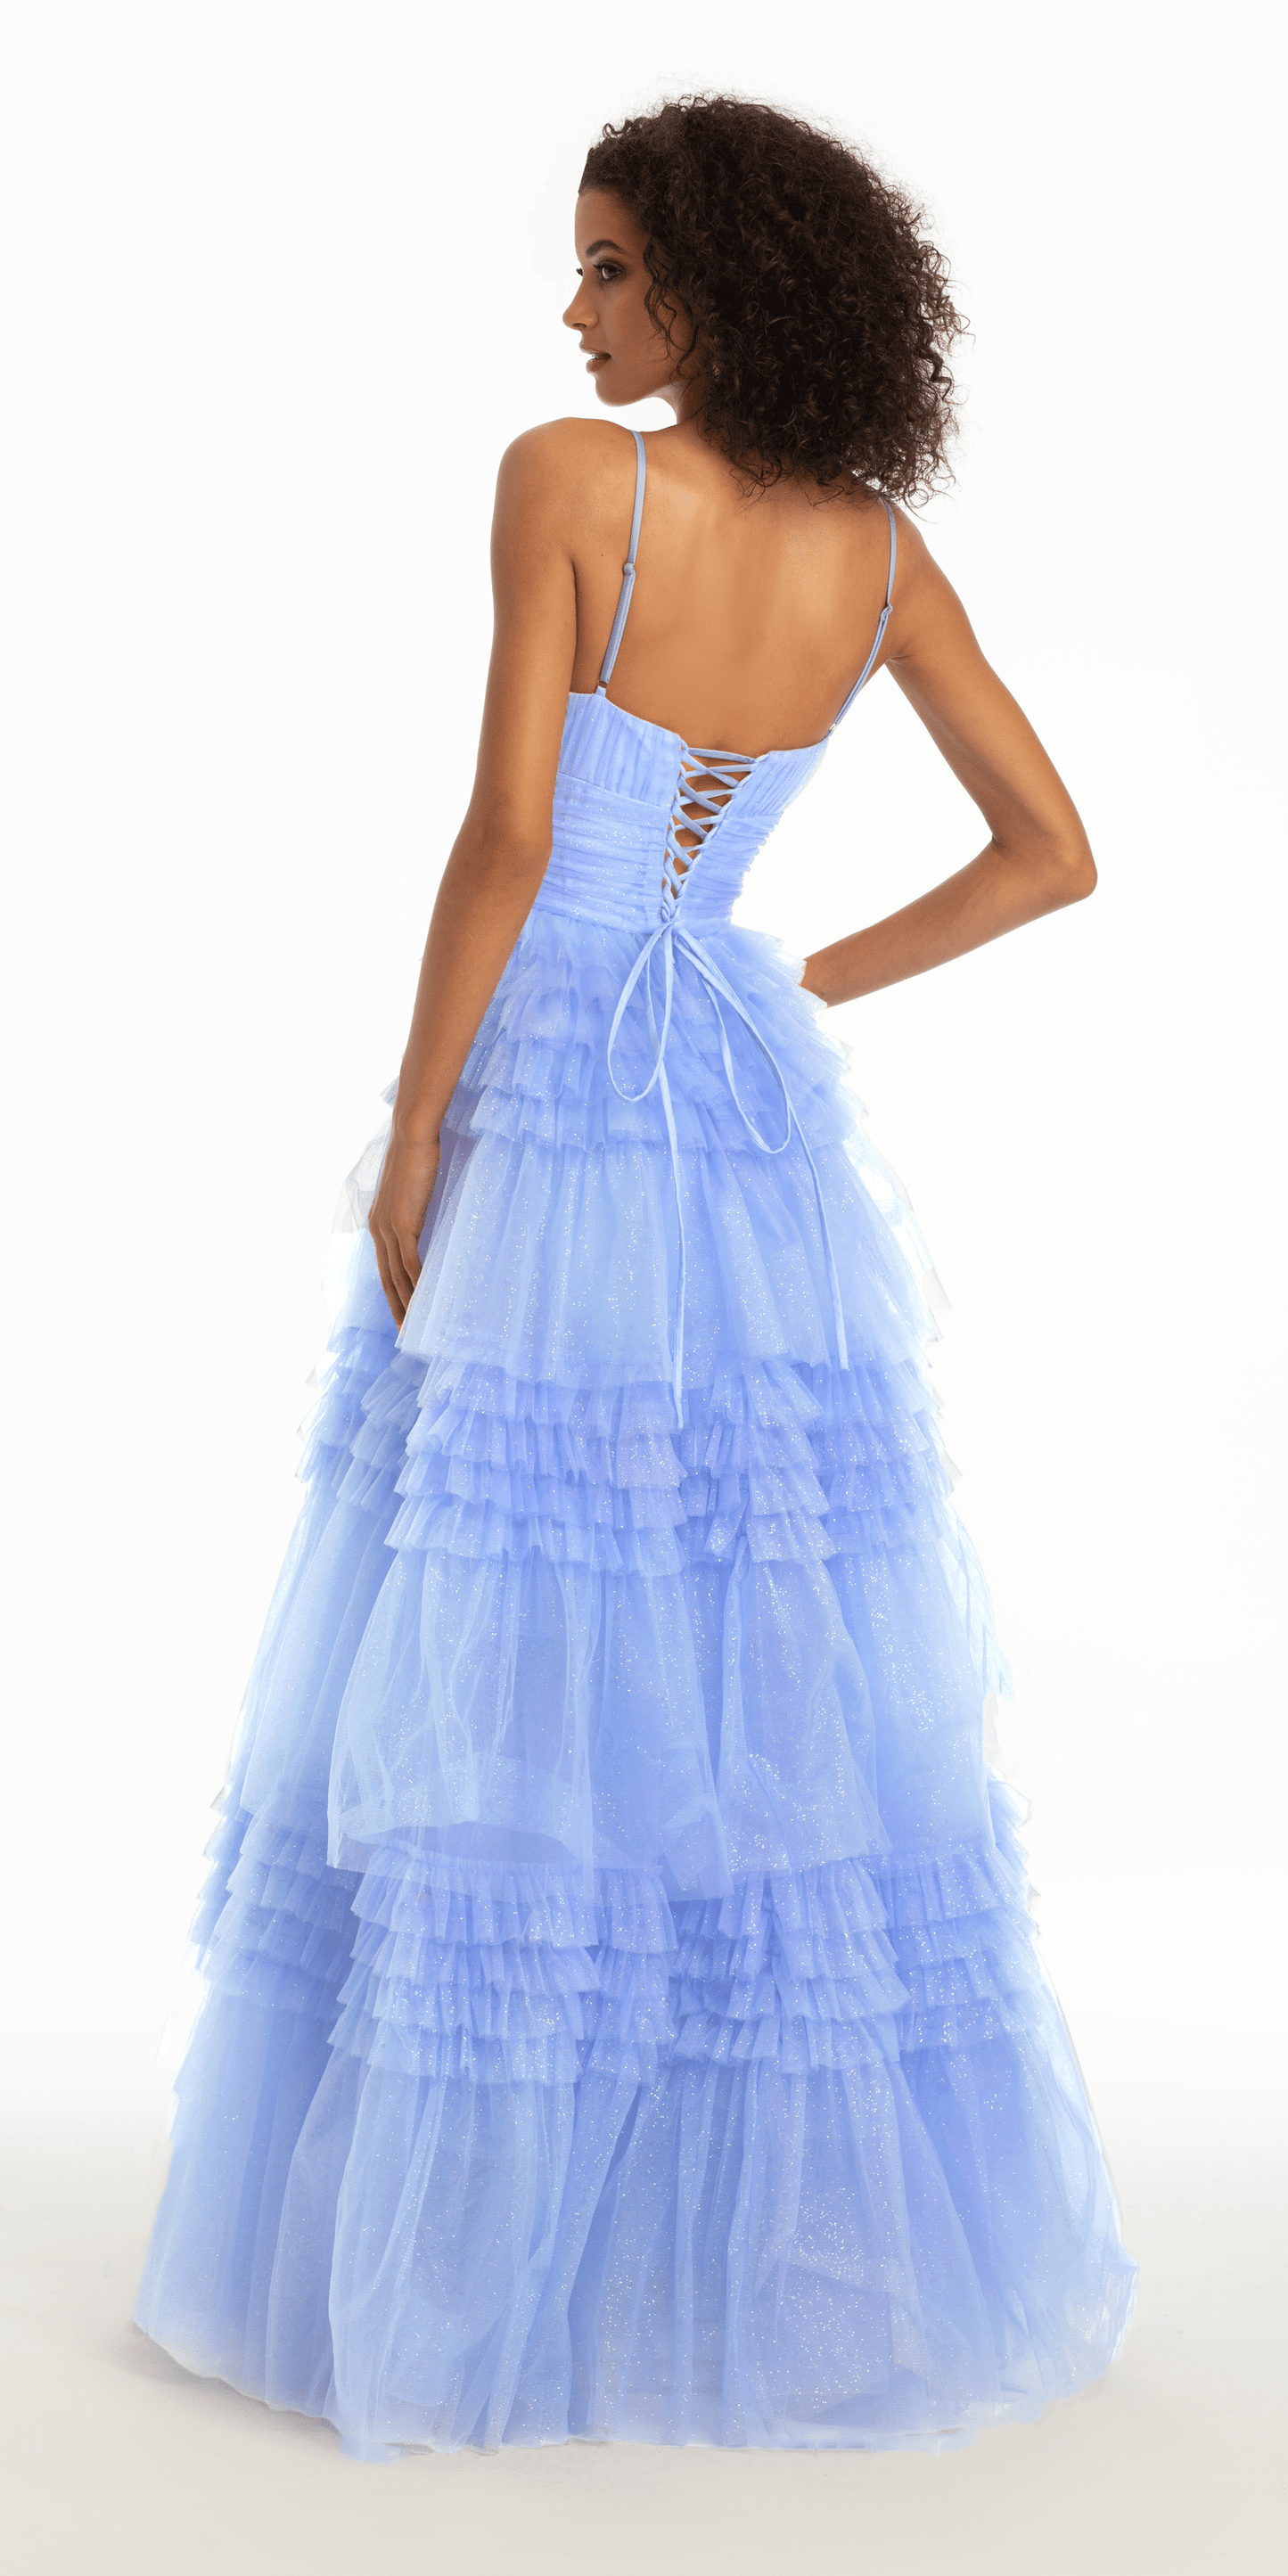 Camille La Vie Sweetheart Mesh Ruched Tiered Lace Up Back Ballgown